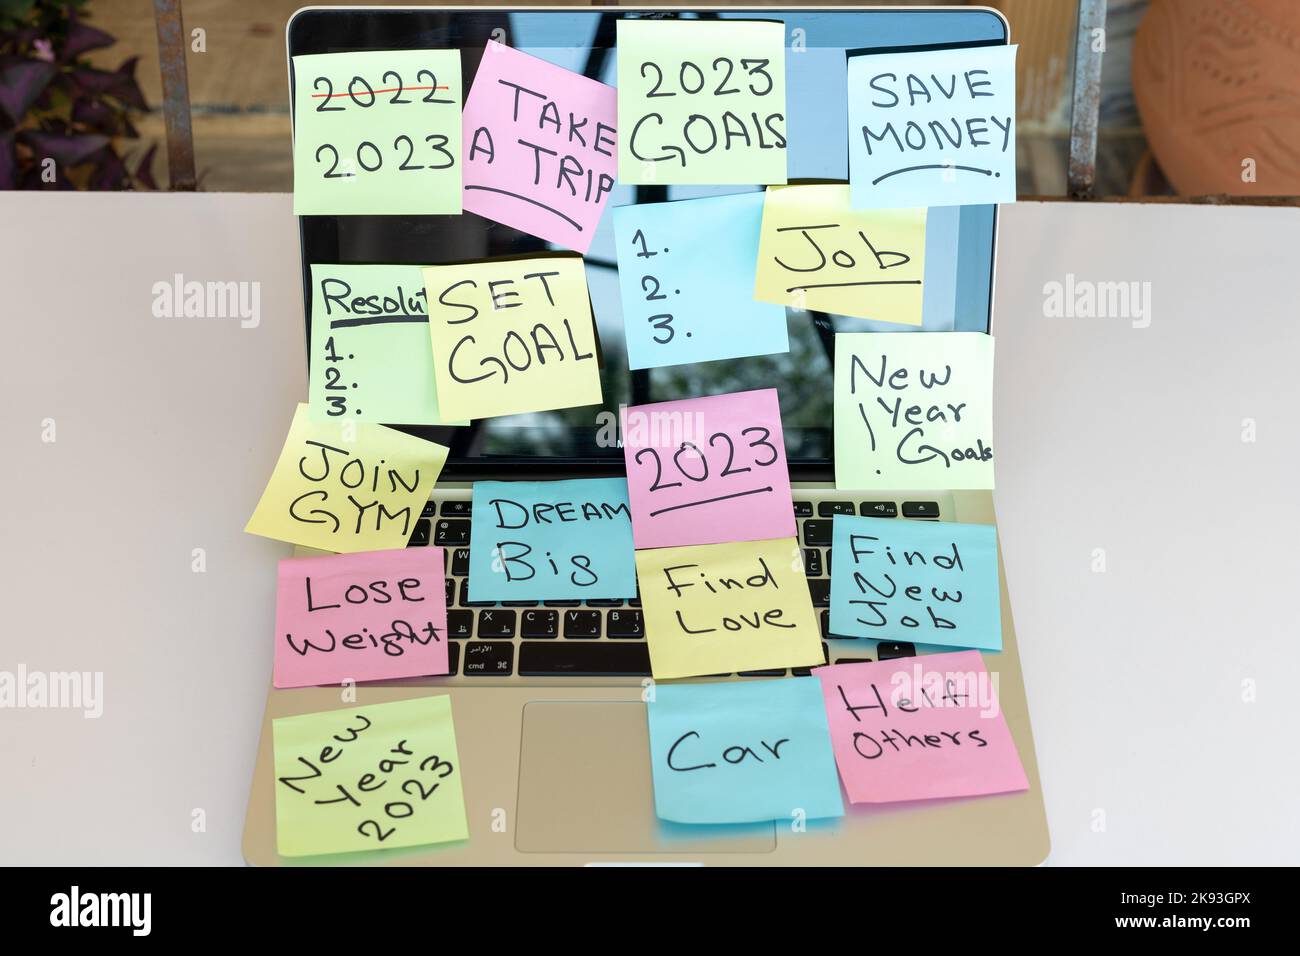 Colorful sticky notes with new year goals and resolutions pasted on a laptop Stock Photo